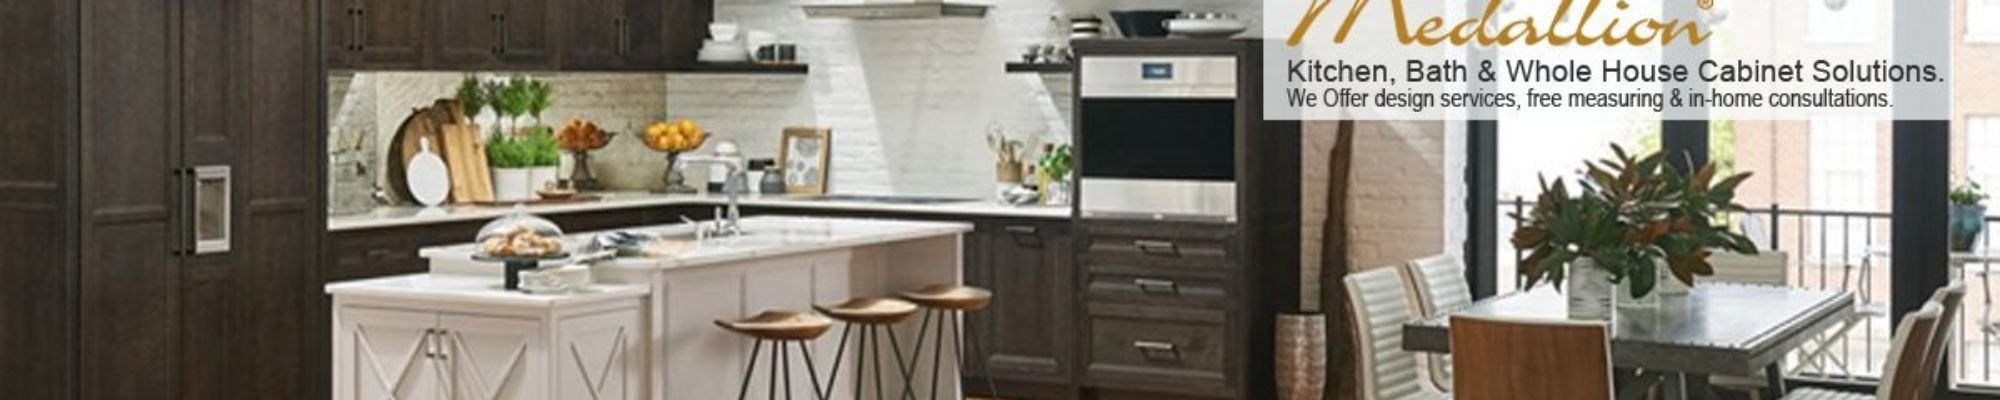 Kitchen from Ace Home & Hardware in Marshall